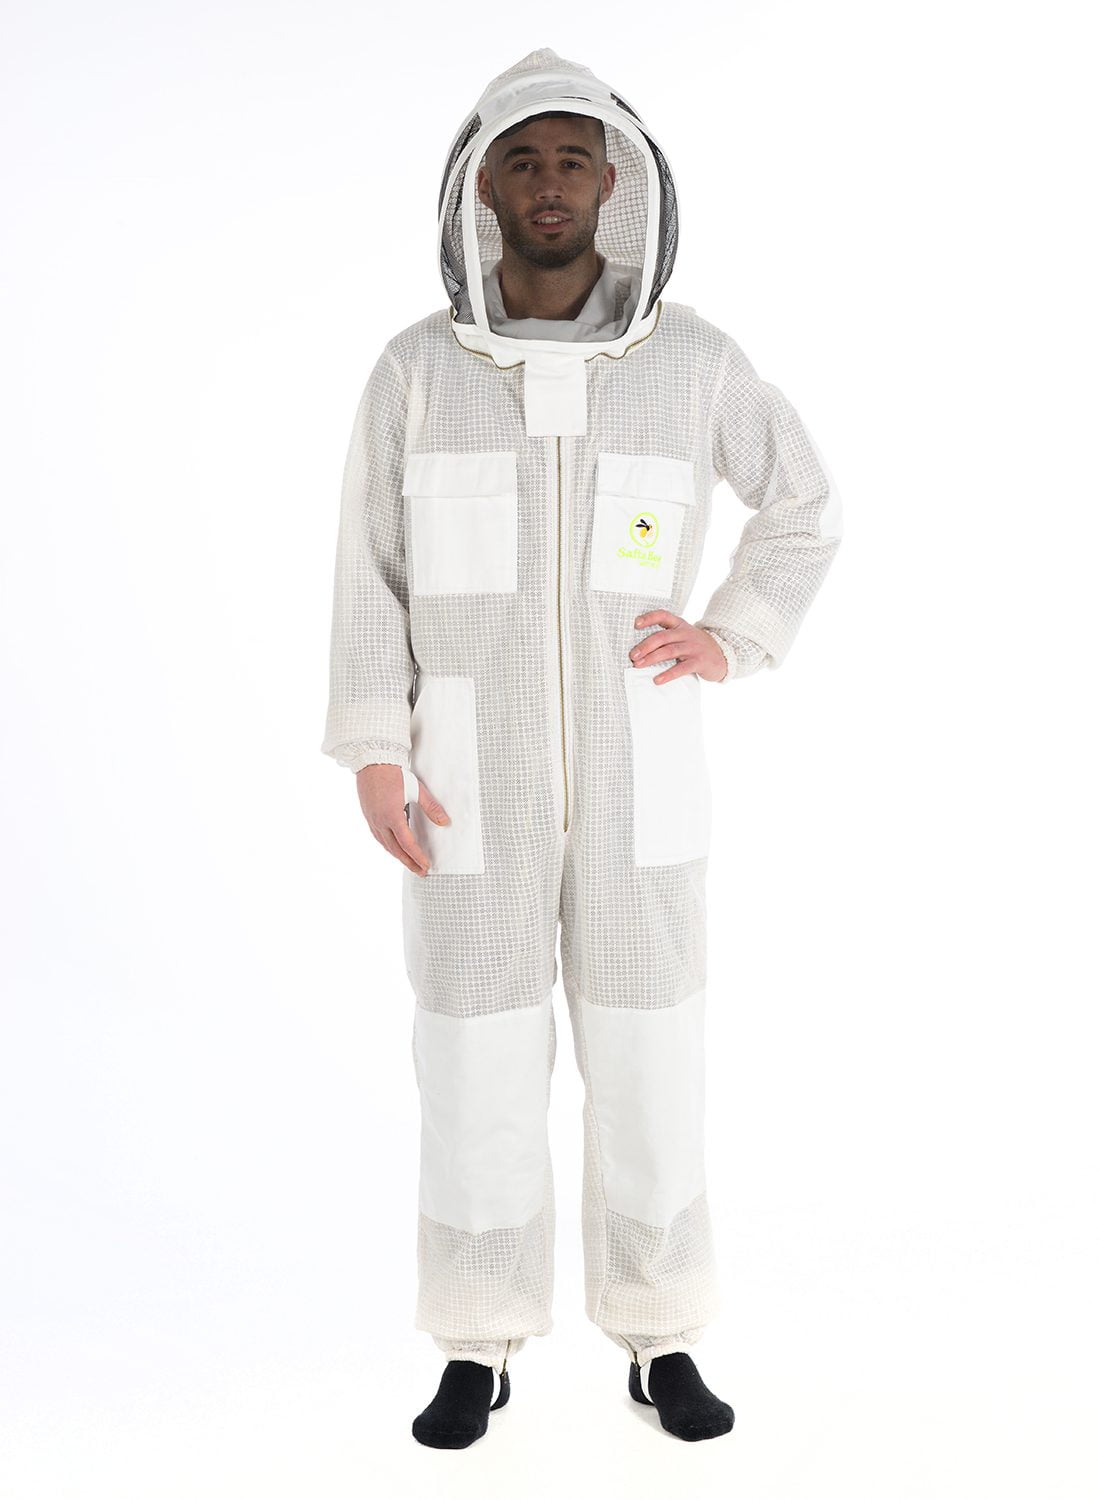 Details about   Pilot Beekeeping Suit Ultra Ventilated 3 Layers Extra Ordinary Features Size 2XL 